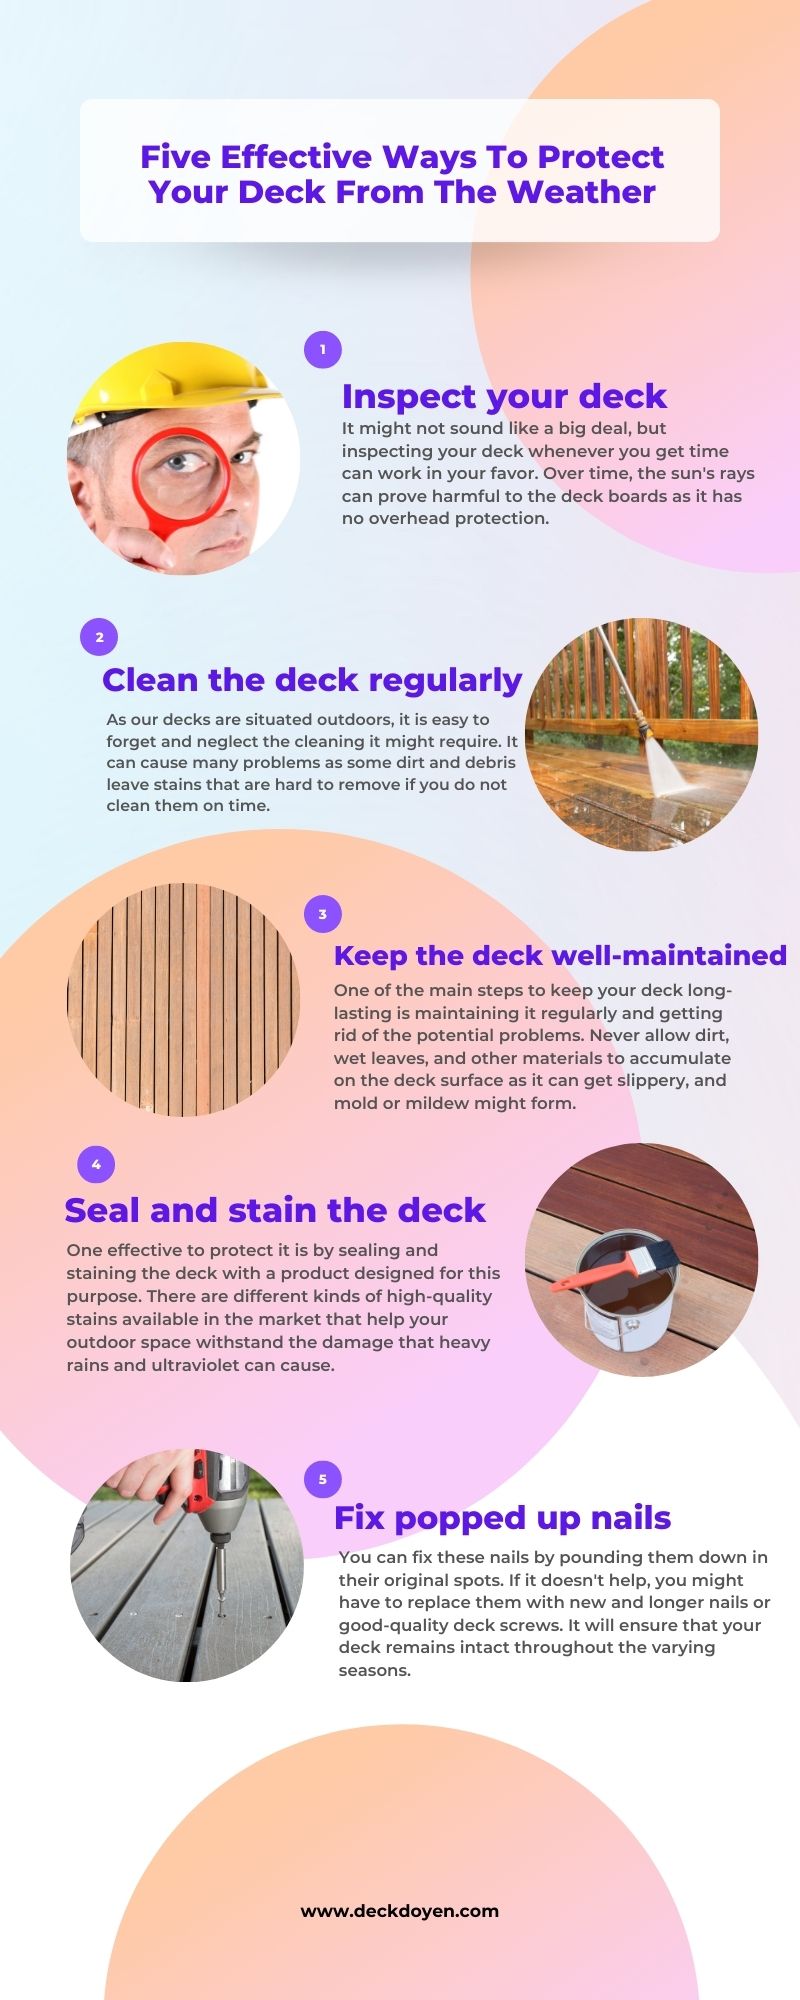 Five Effective Ways To Protect Your Deck From The Weather